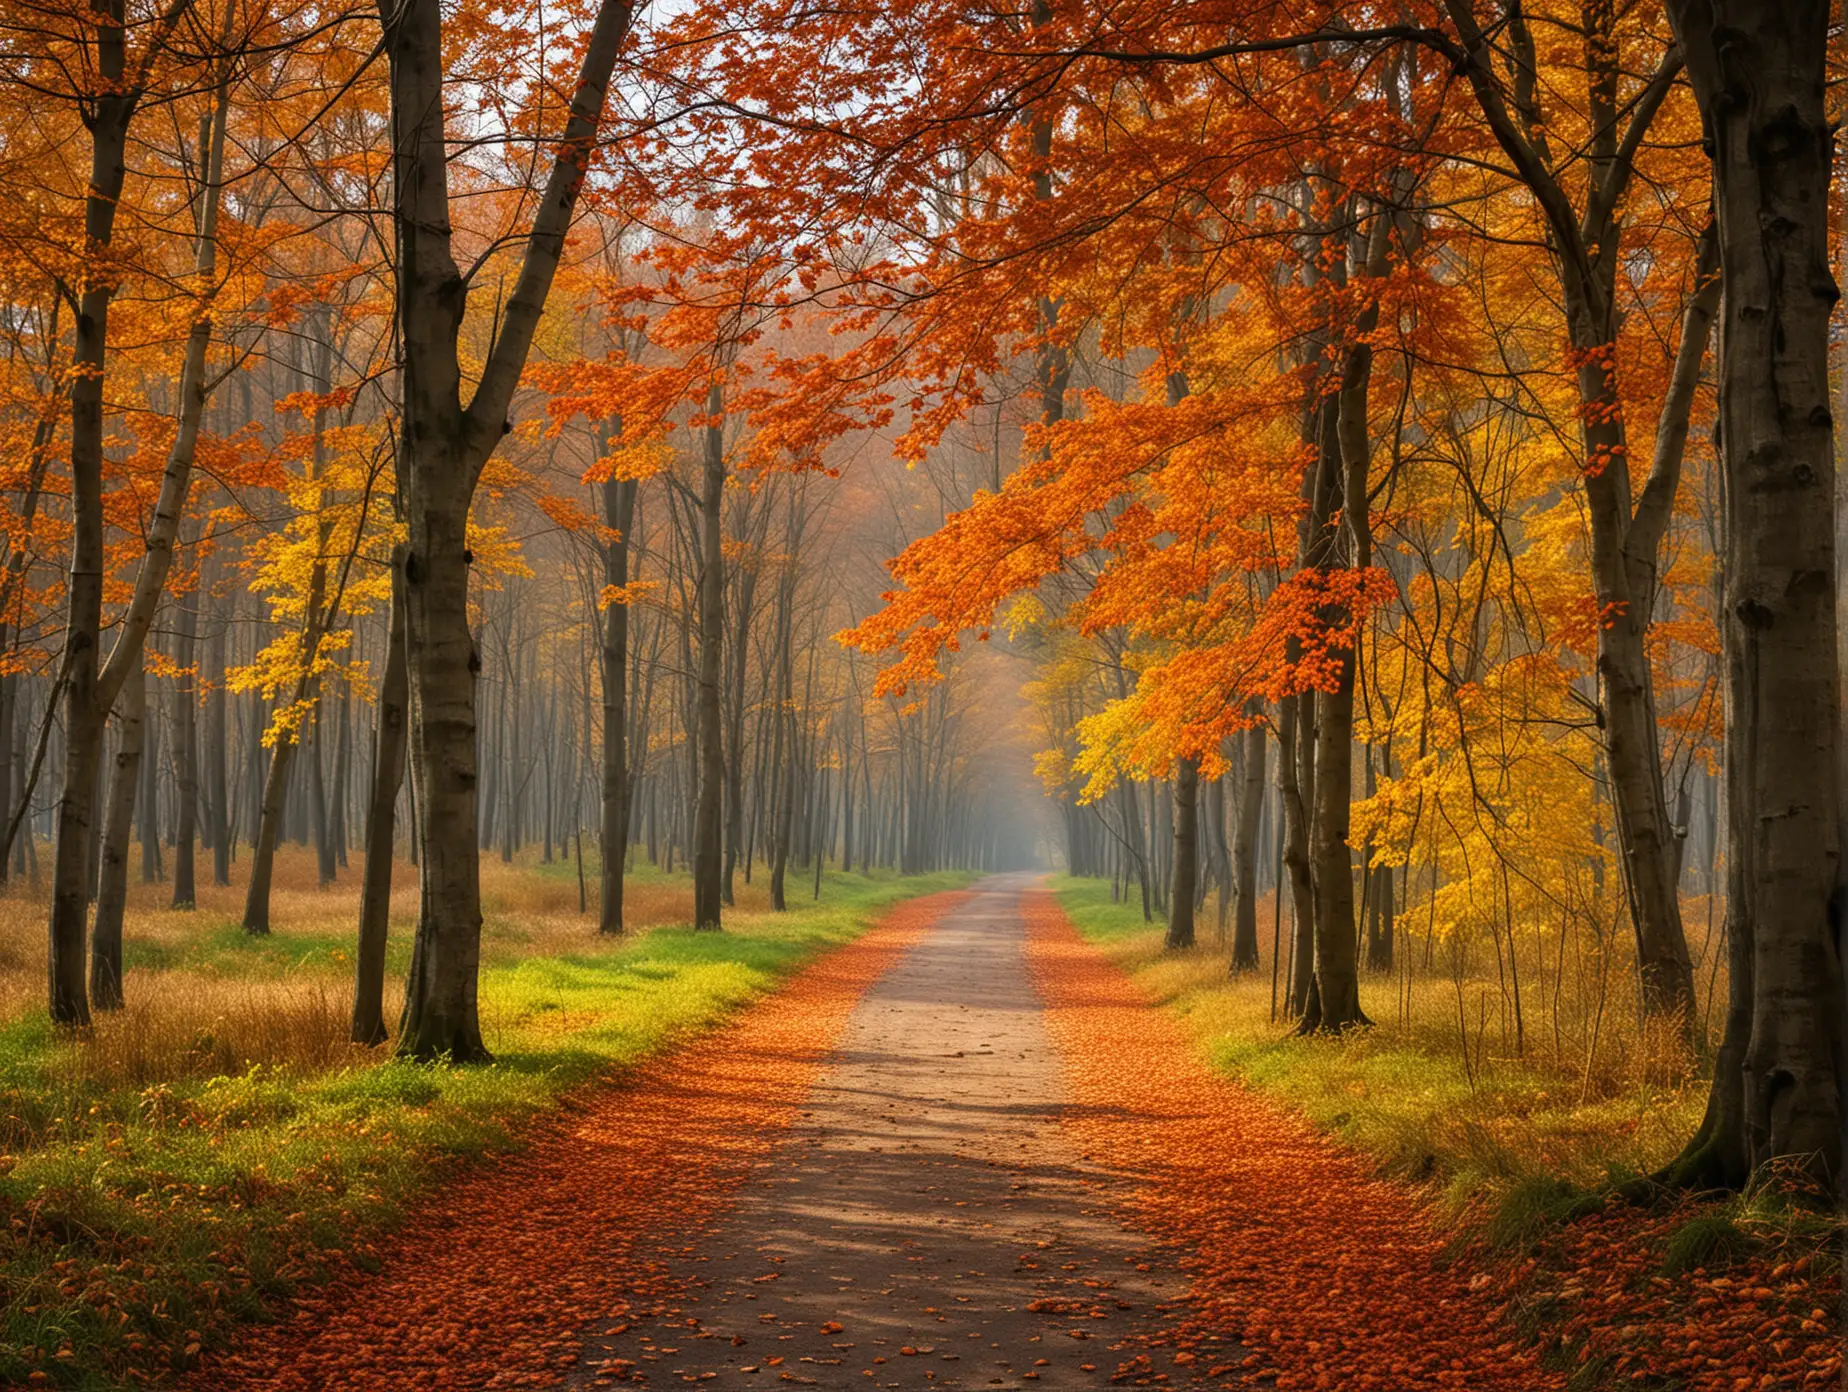 Vibrant Autumn Scenery Captured with Professional Photography Techniques